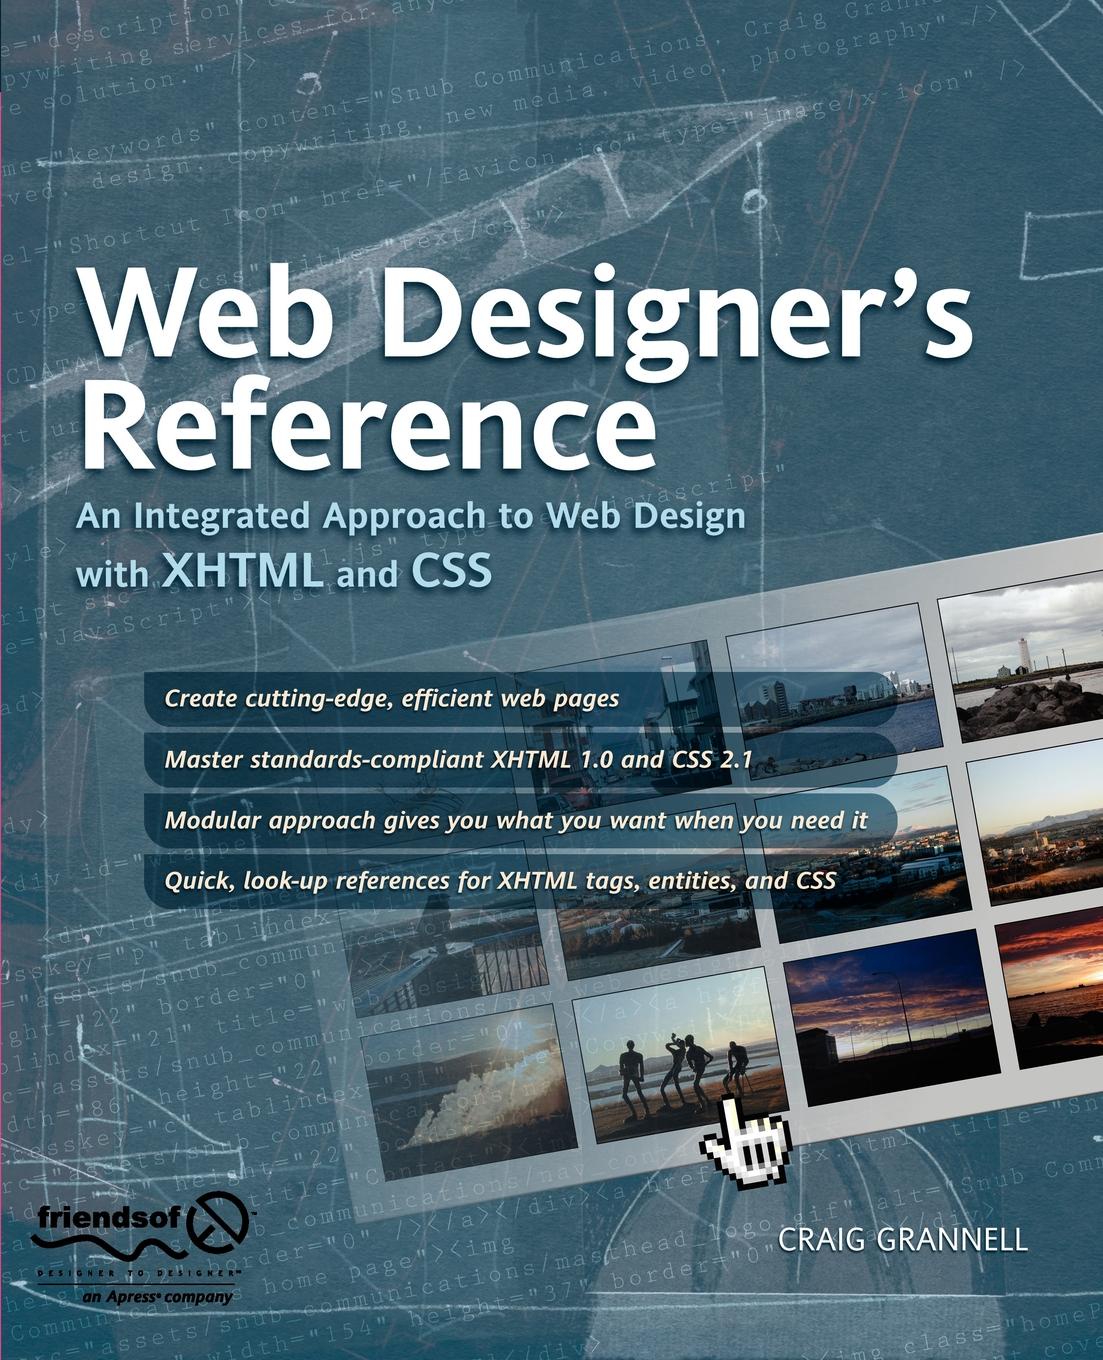 Web Designer`s Reference. An Integrated Approach to Web Design with XHTML and CSS